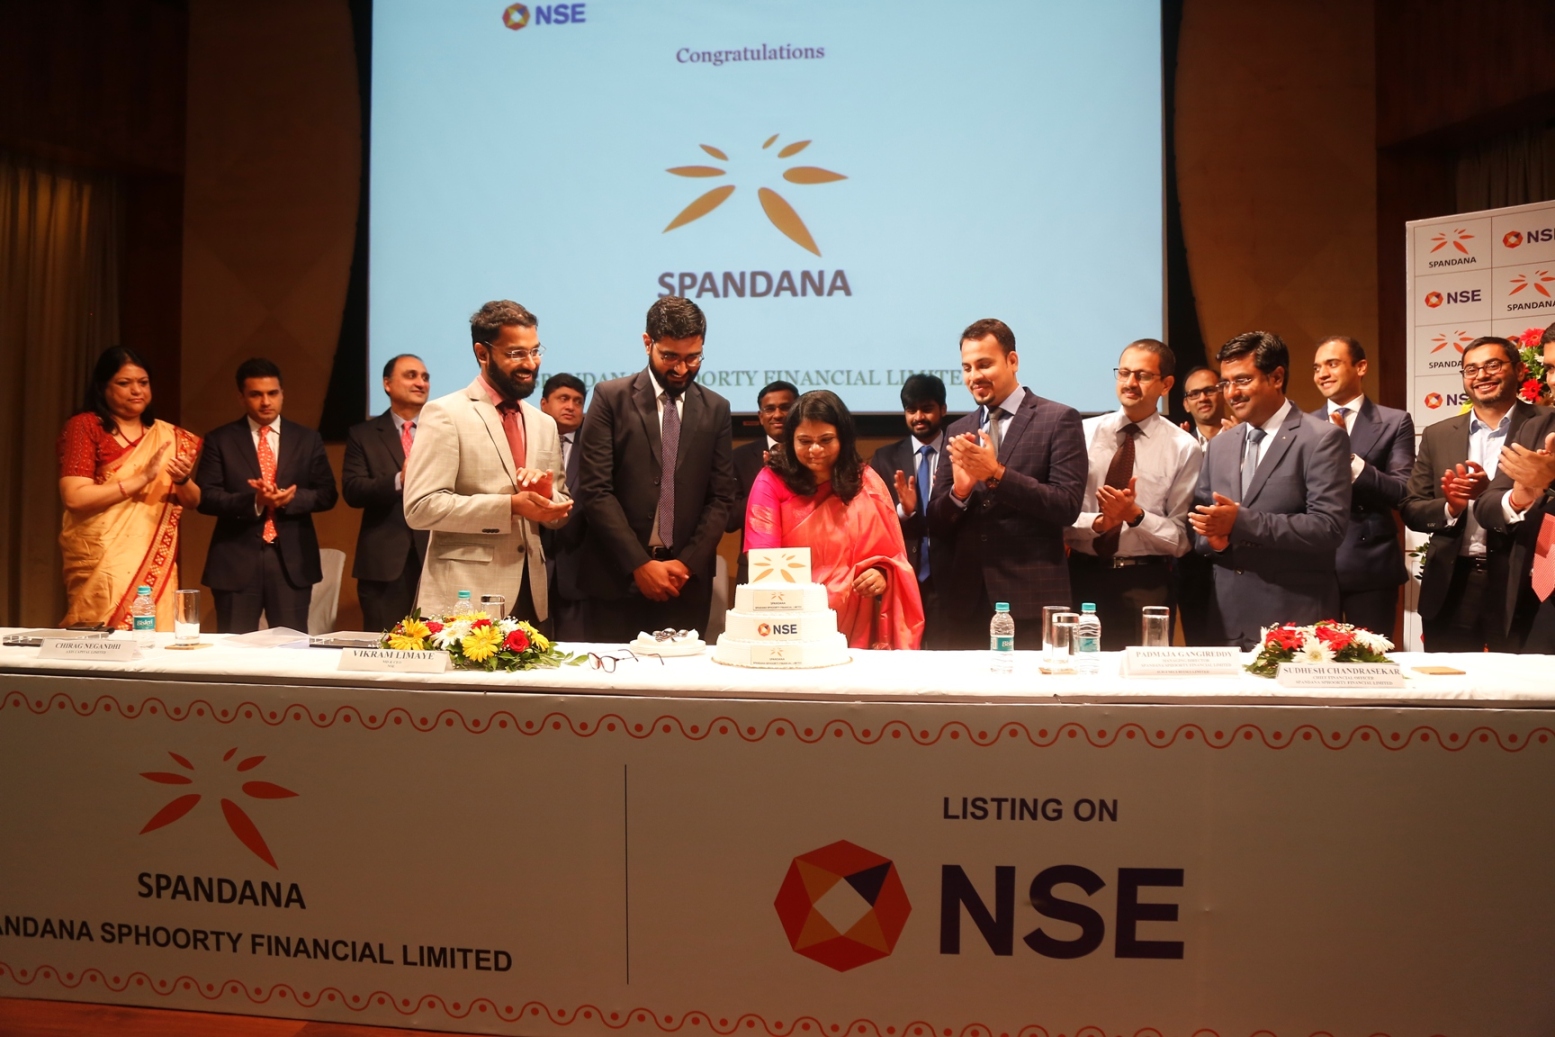 Ms. Padmaja Gangireddy (Managing Director, Spandana Sphoorty Financial Limited) cutting the cake with Spandana Sphoorty team and other dignitaries on the occasion of the listing ceremony of Spandana Sphoorty Financial Limited held today in Mumbai at NSE.-Photo By GPN